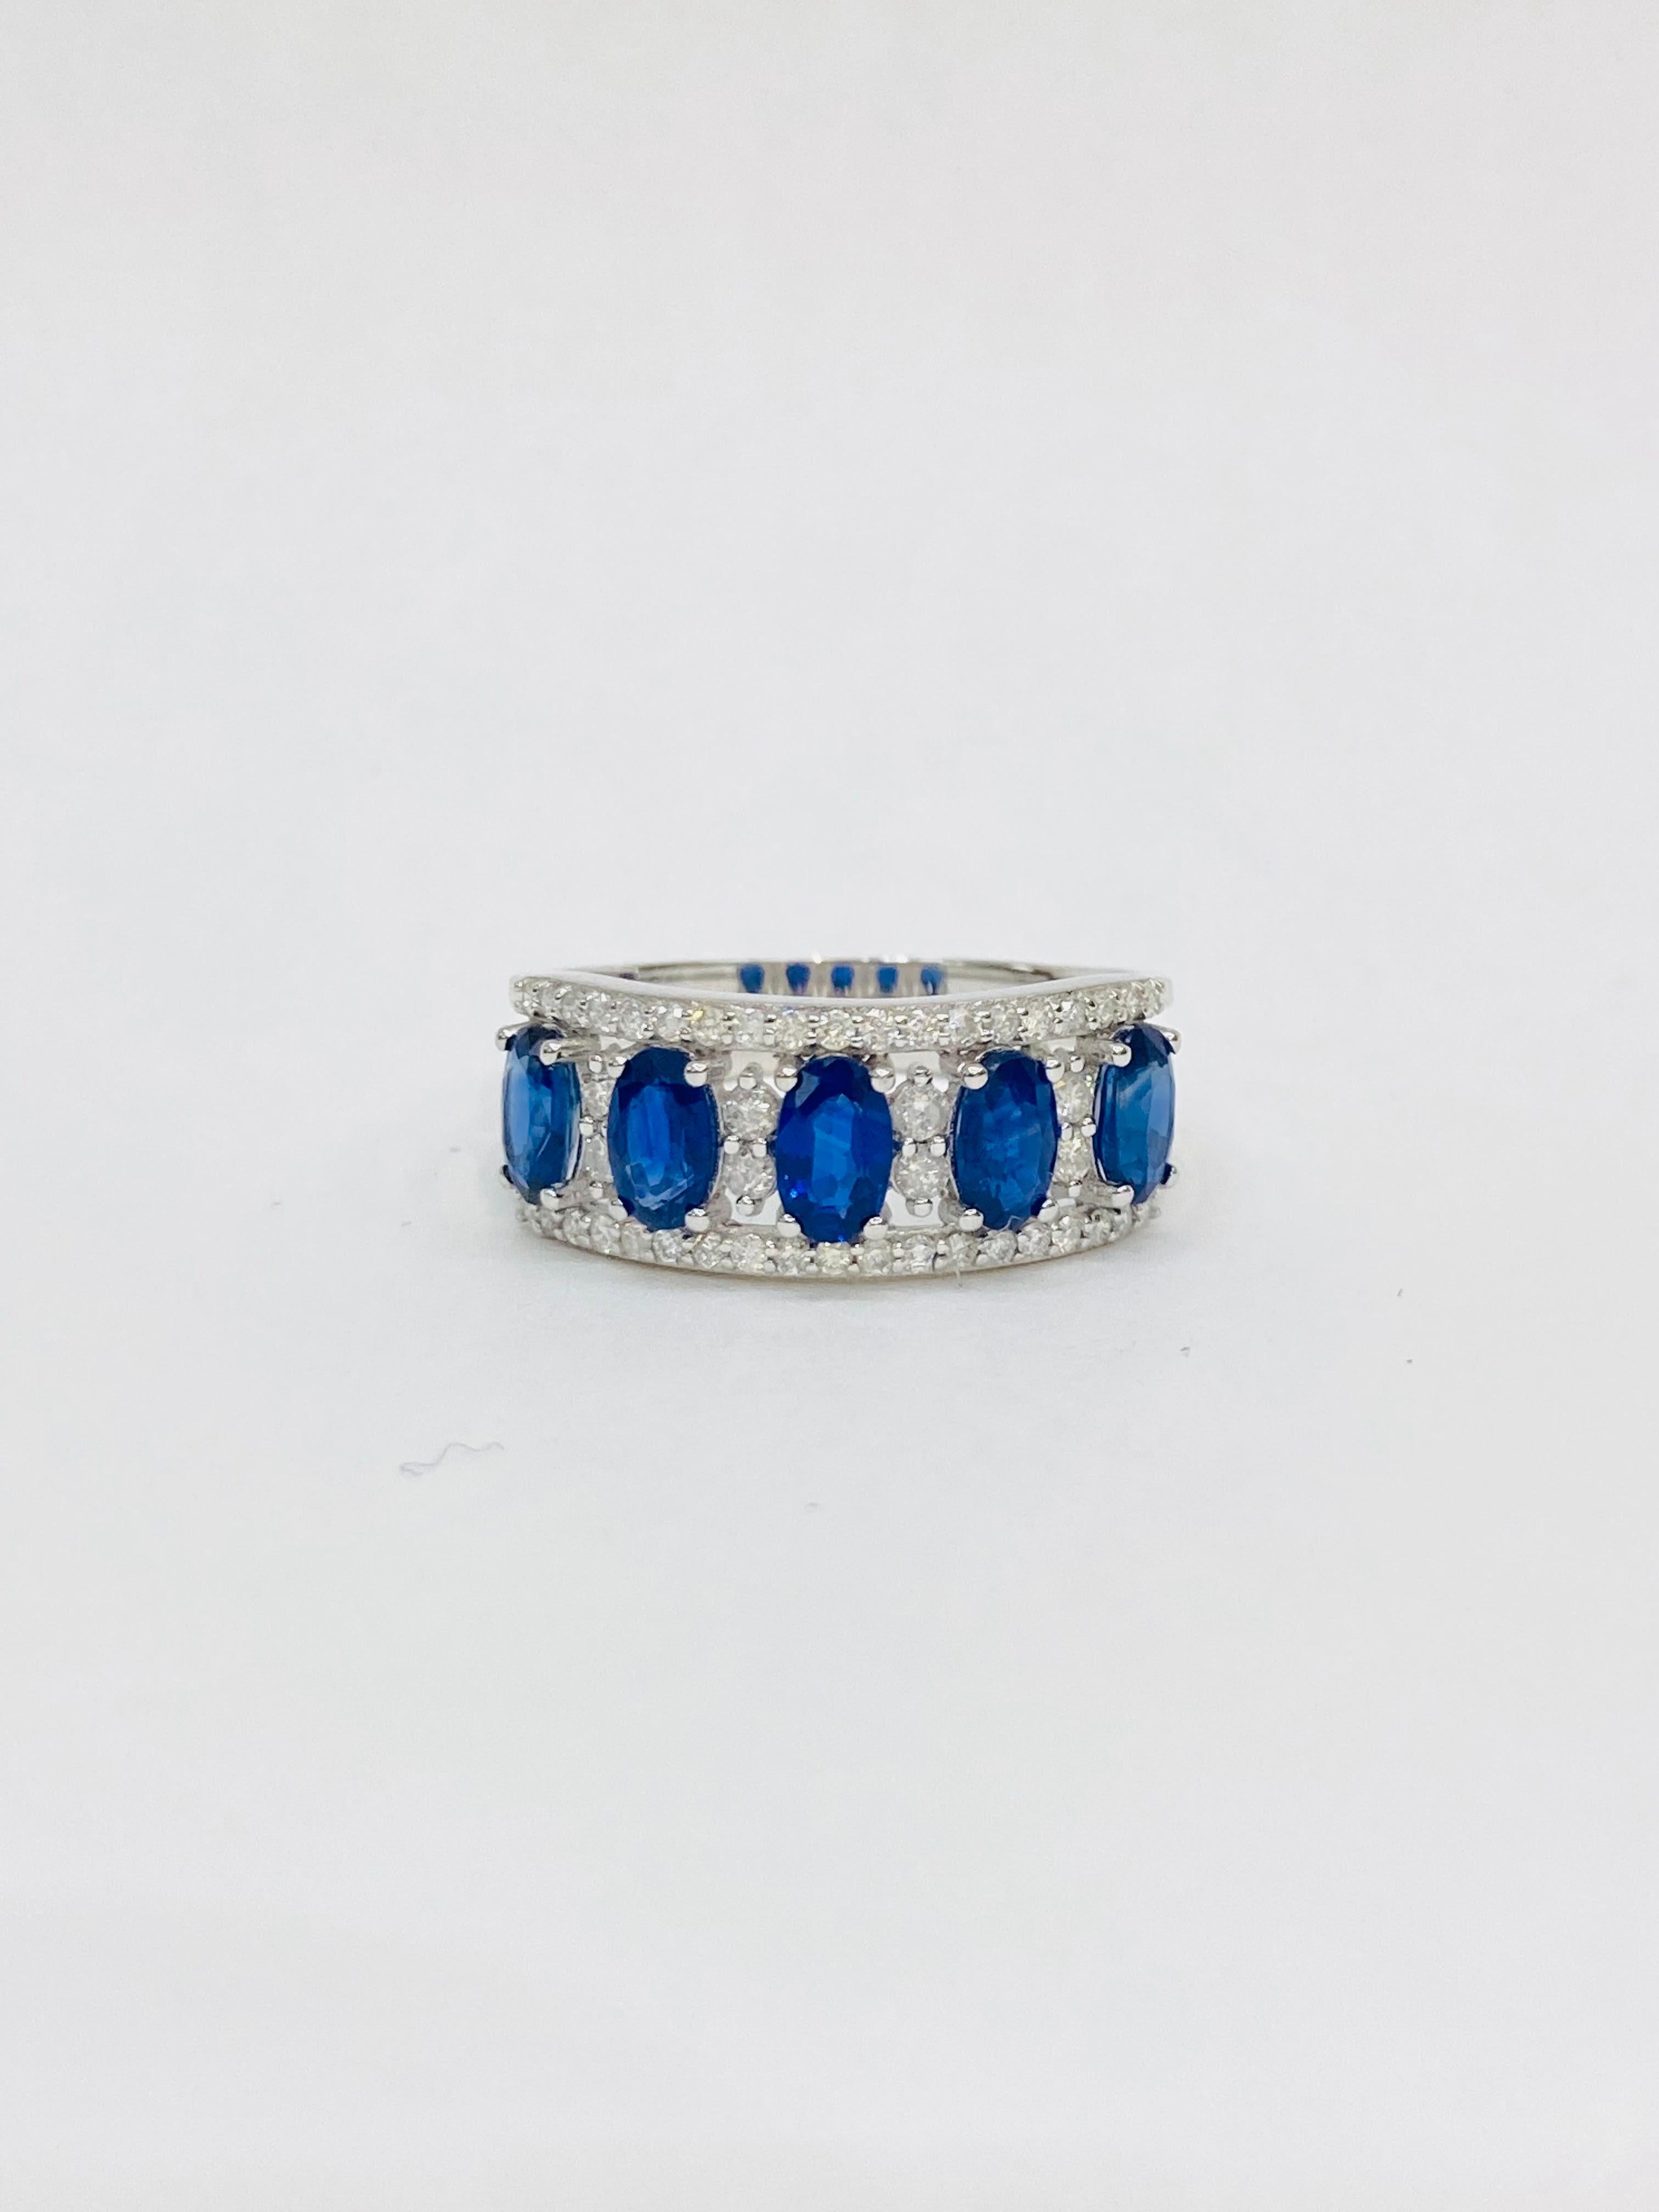 Bochic “Retro Vintage” Sapphire & Diamond  18K Gold & Eternity Cluster Ring.
Natural Blue Sapphire from Sri Lanka  1.60 Carat 
Oval Shapes 
Diamonds 0.35 Carat 
Round Brilliant
F color 
VS clarity 
18K White Gold
3.50 Gram

This Ring is from the